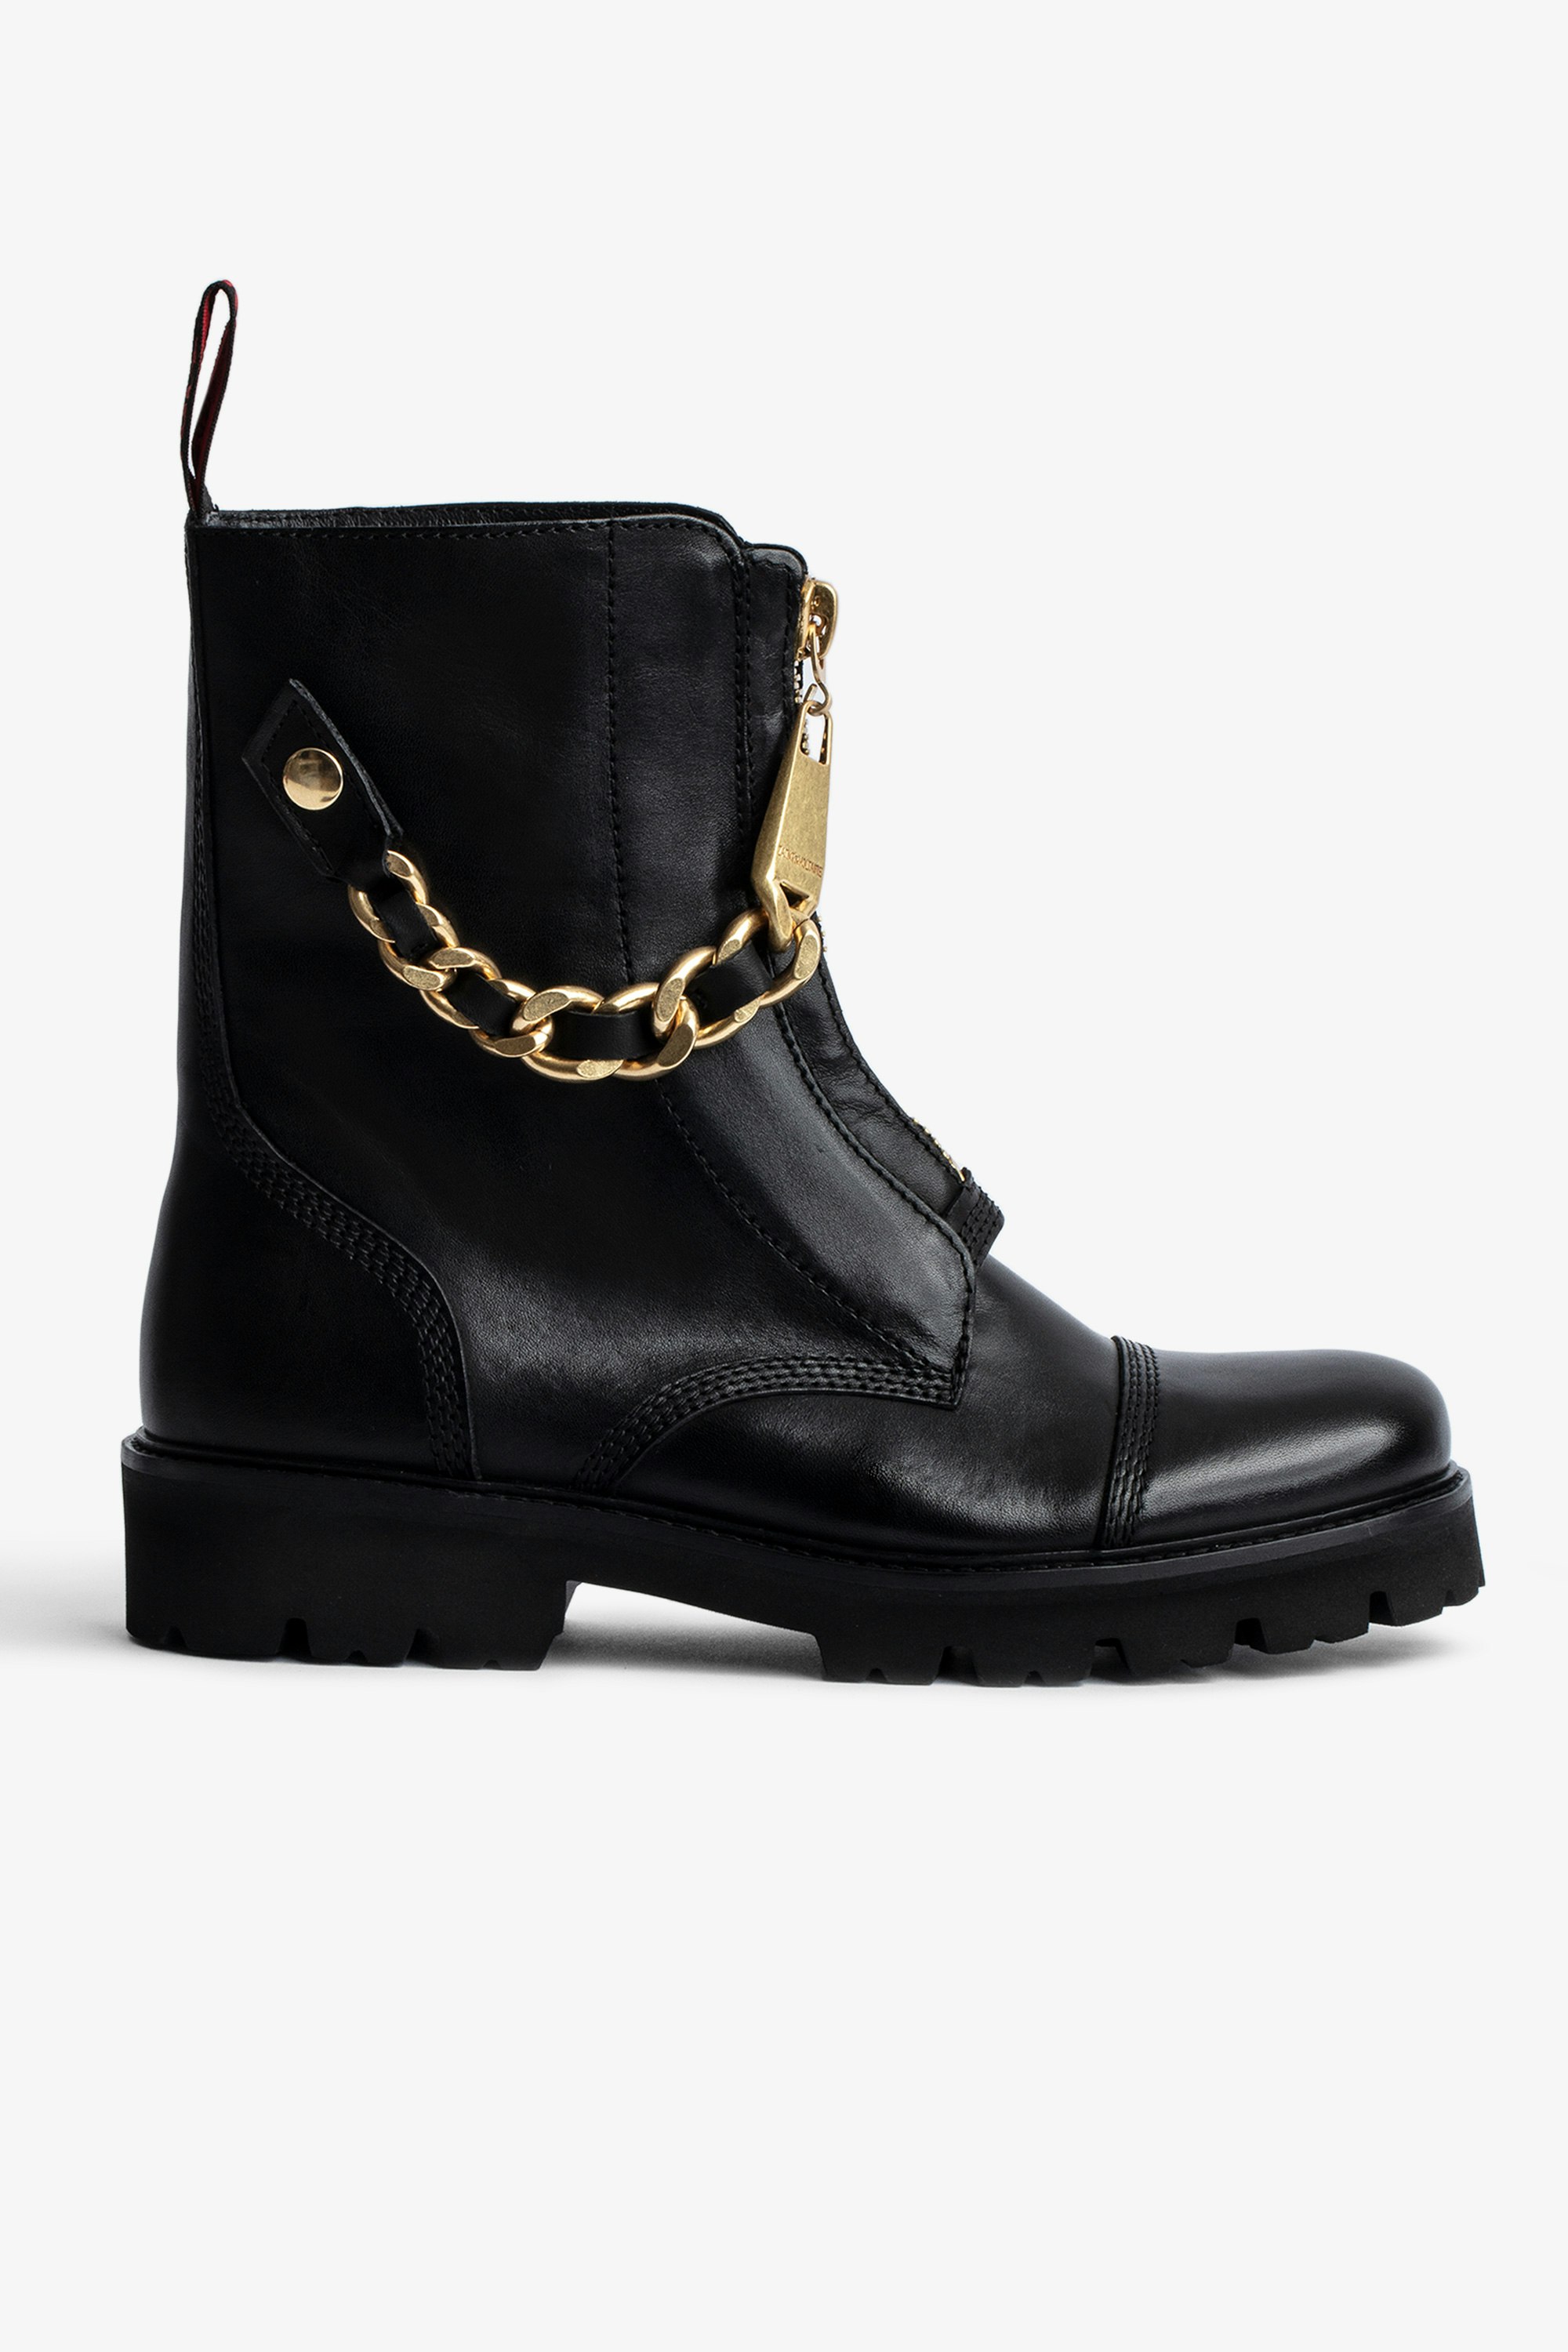 Joe Ankle Boots Women’s black smooth leather mid-calf boots with an interwoven gold-tone and leather chain